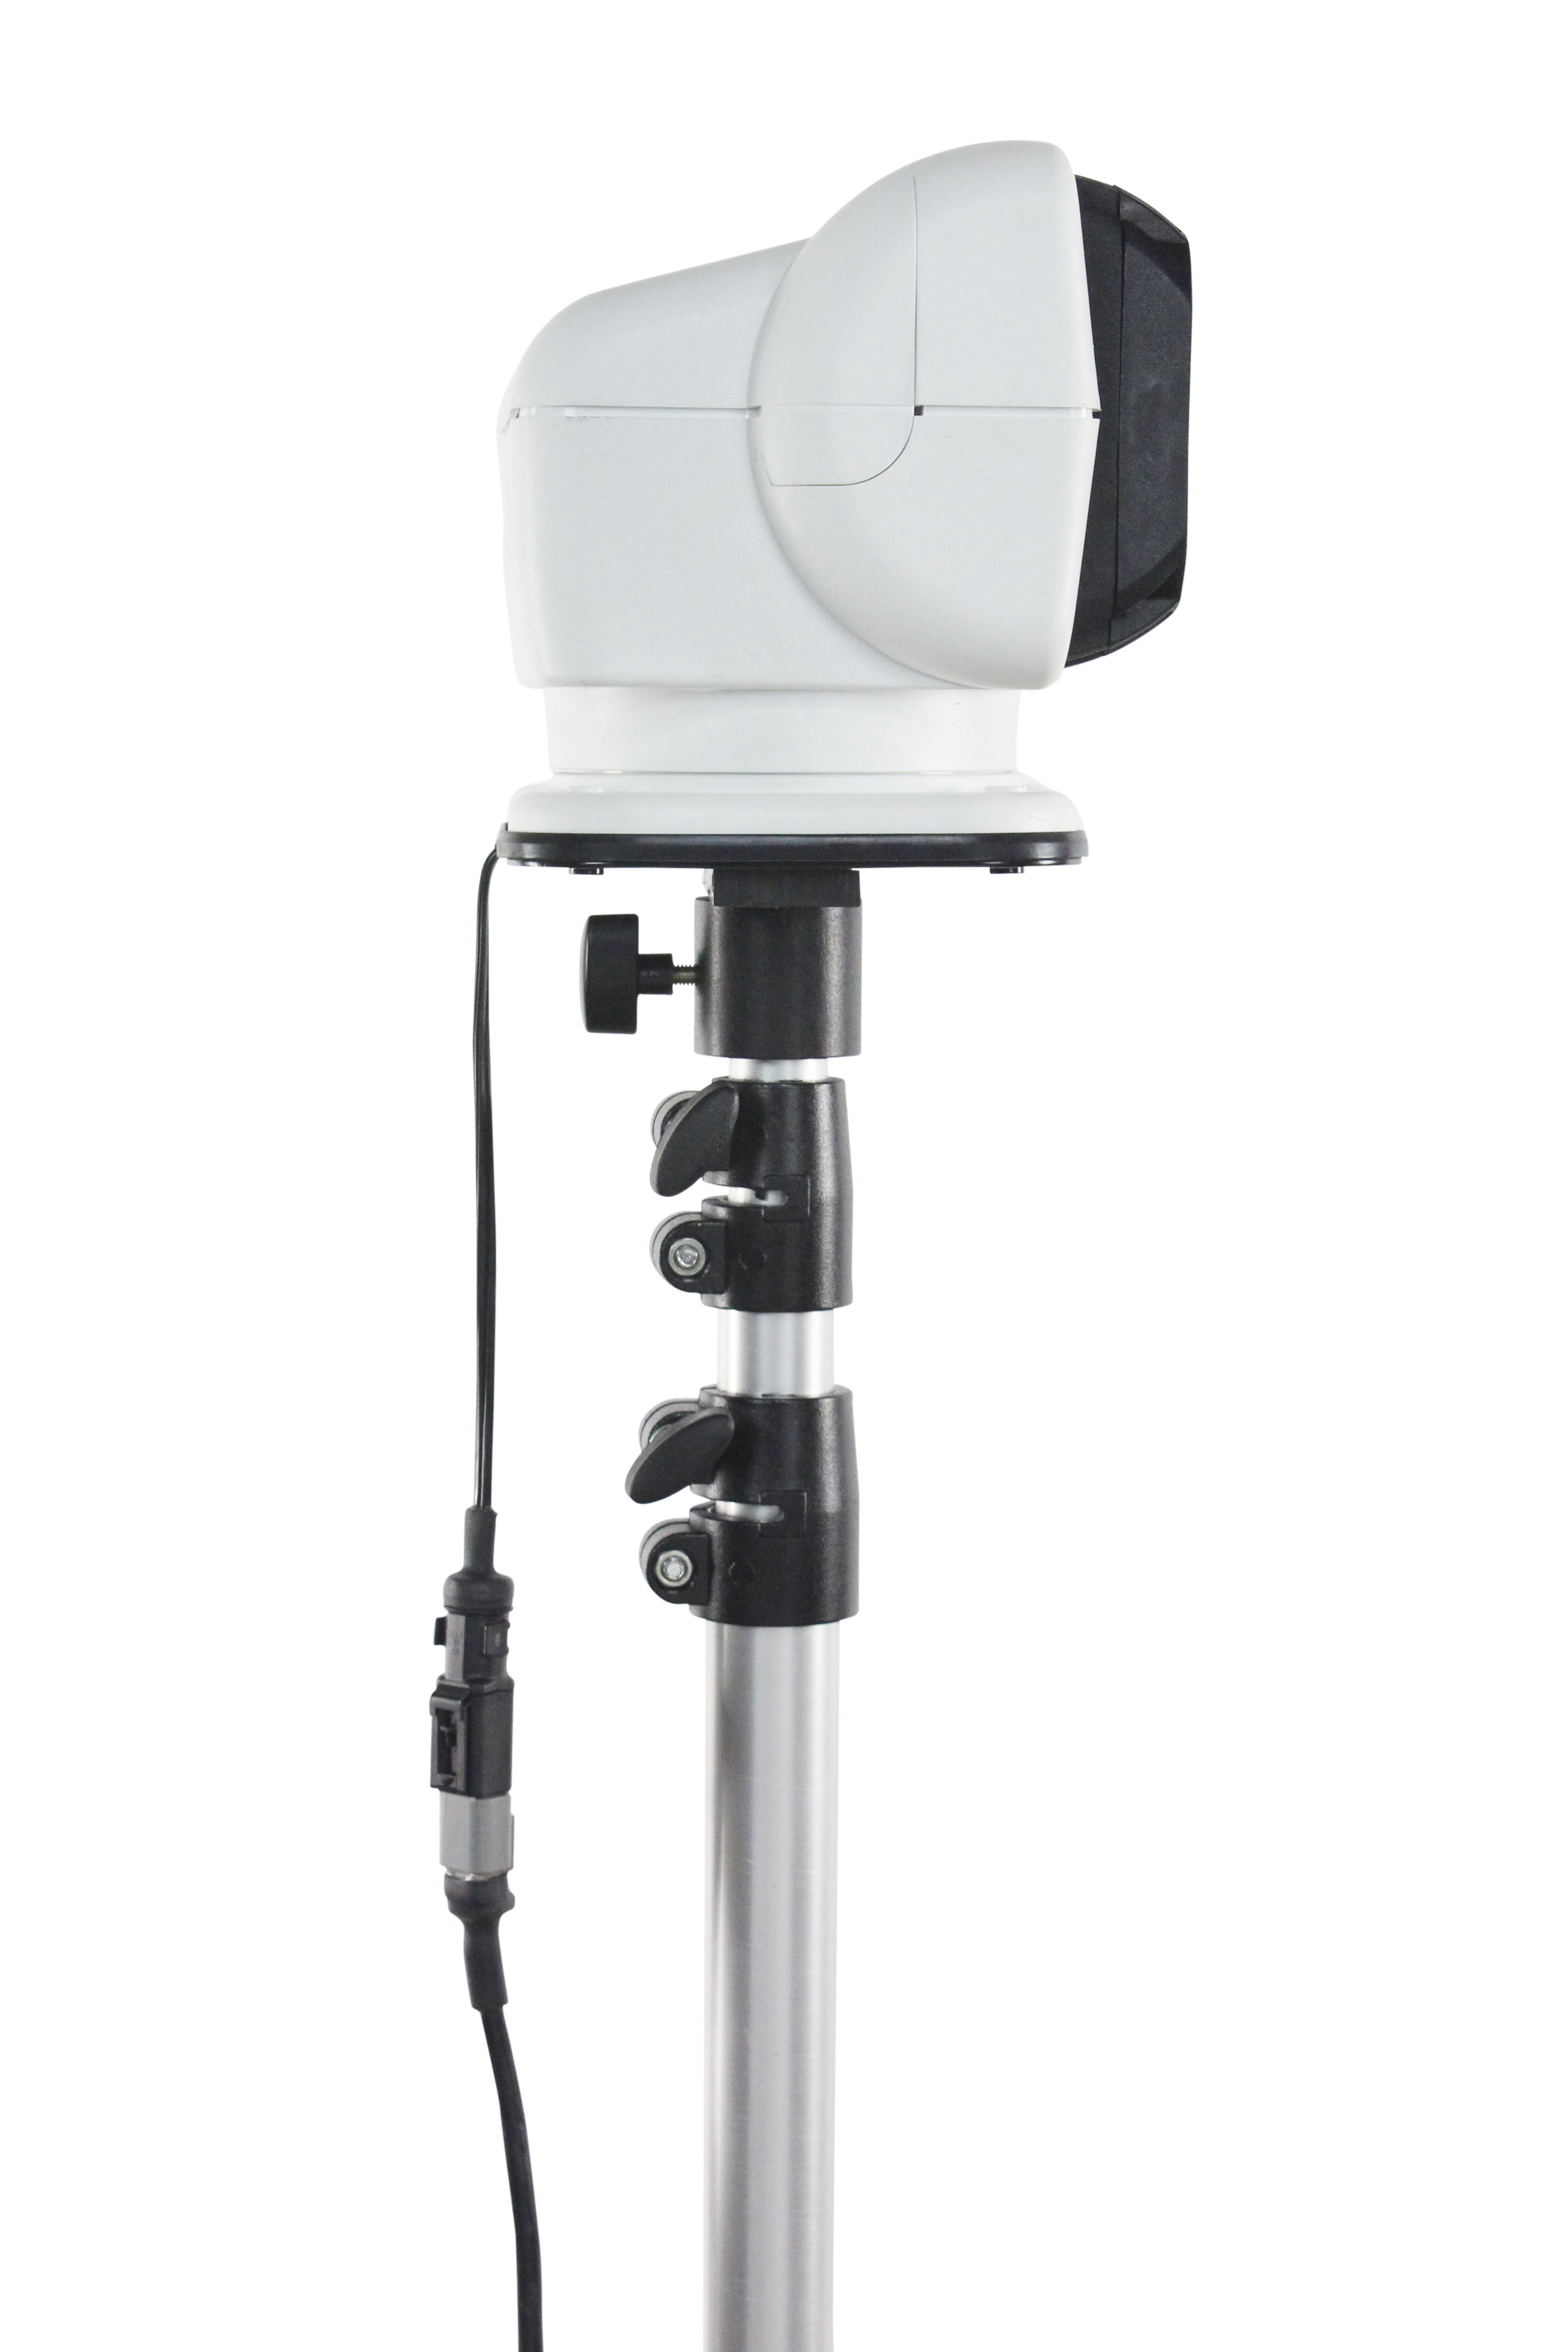 Pole Mounted LED Spotlight with Wireless Remote Operation